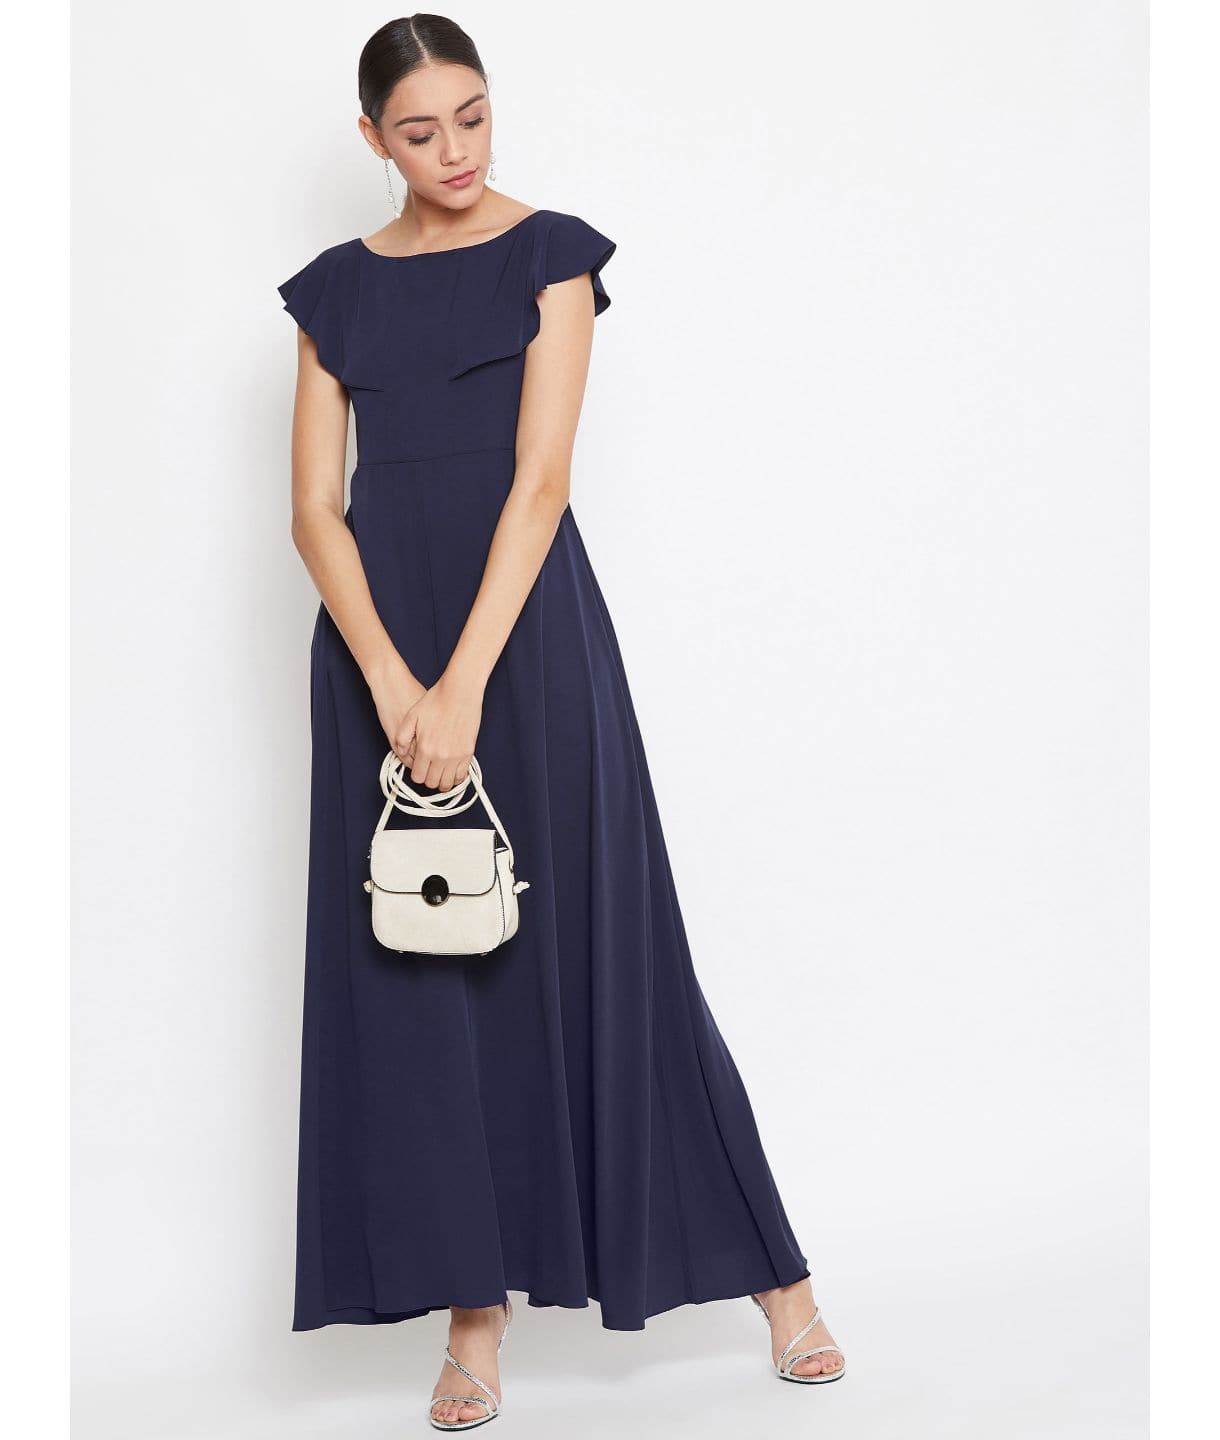 Plus Navy Blue Solid Crepe Ruffled Maxi Dress/Gown - Uptownie